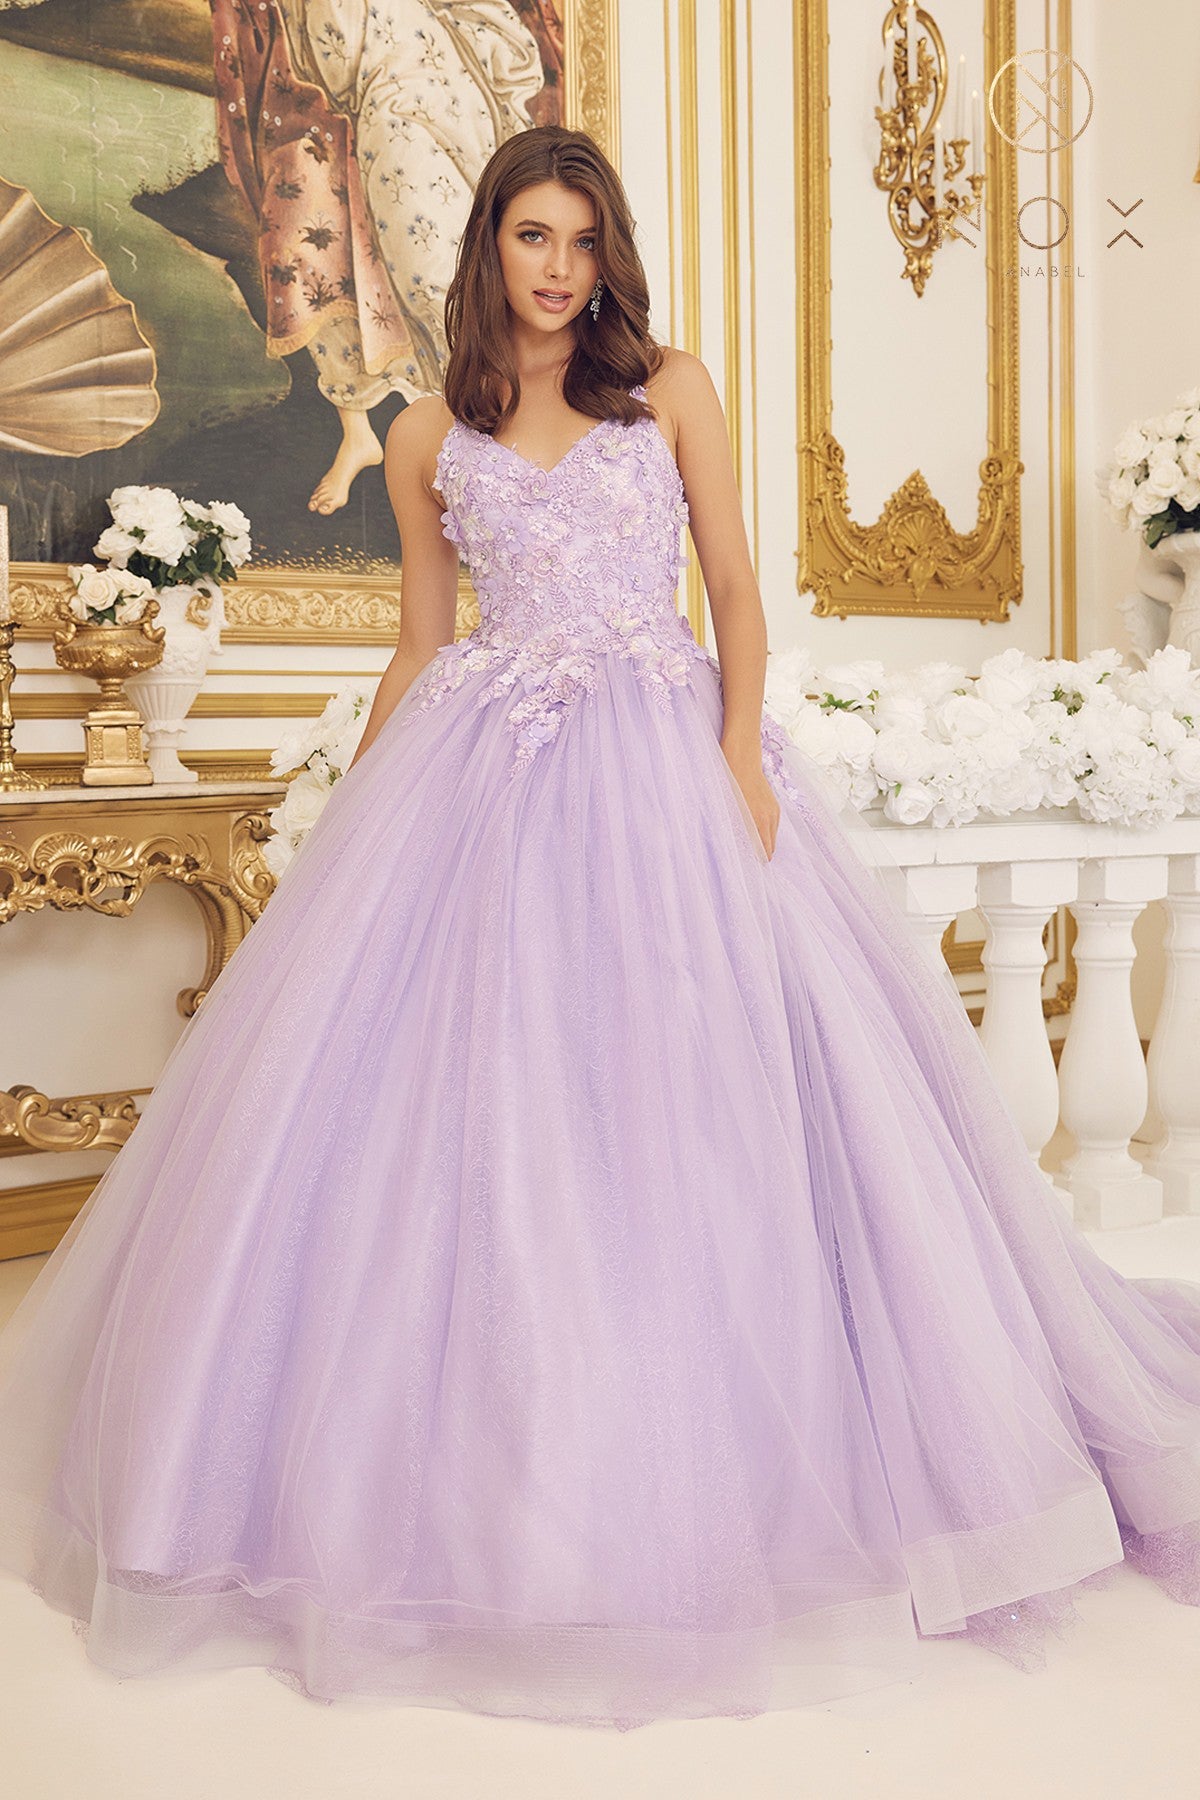 The Nox Anabel C1115 features a shimmering 3D lace sequin prom dress with a train formal gown. Designed with a luxurious satin material and a timeless silhouette, this dress is sure to make a glamorous statement. The elegant design and attention to detail give a timeless, graceful look.  Sizes: 4-16  Colors: Lilac, Emerald, Blue